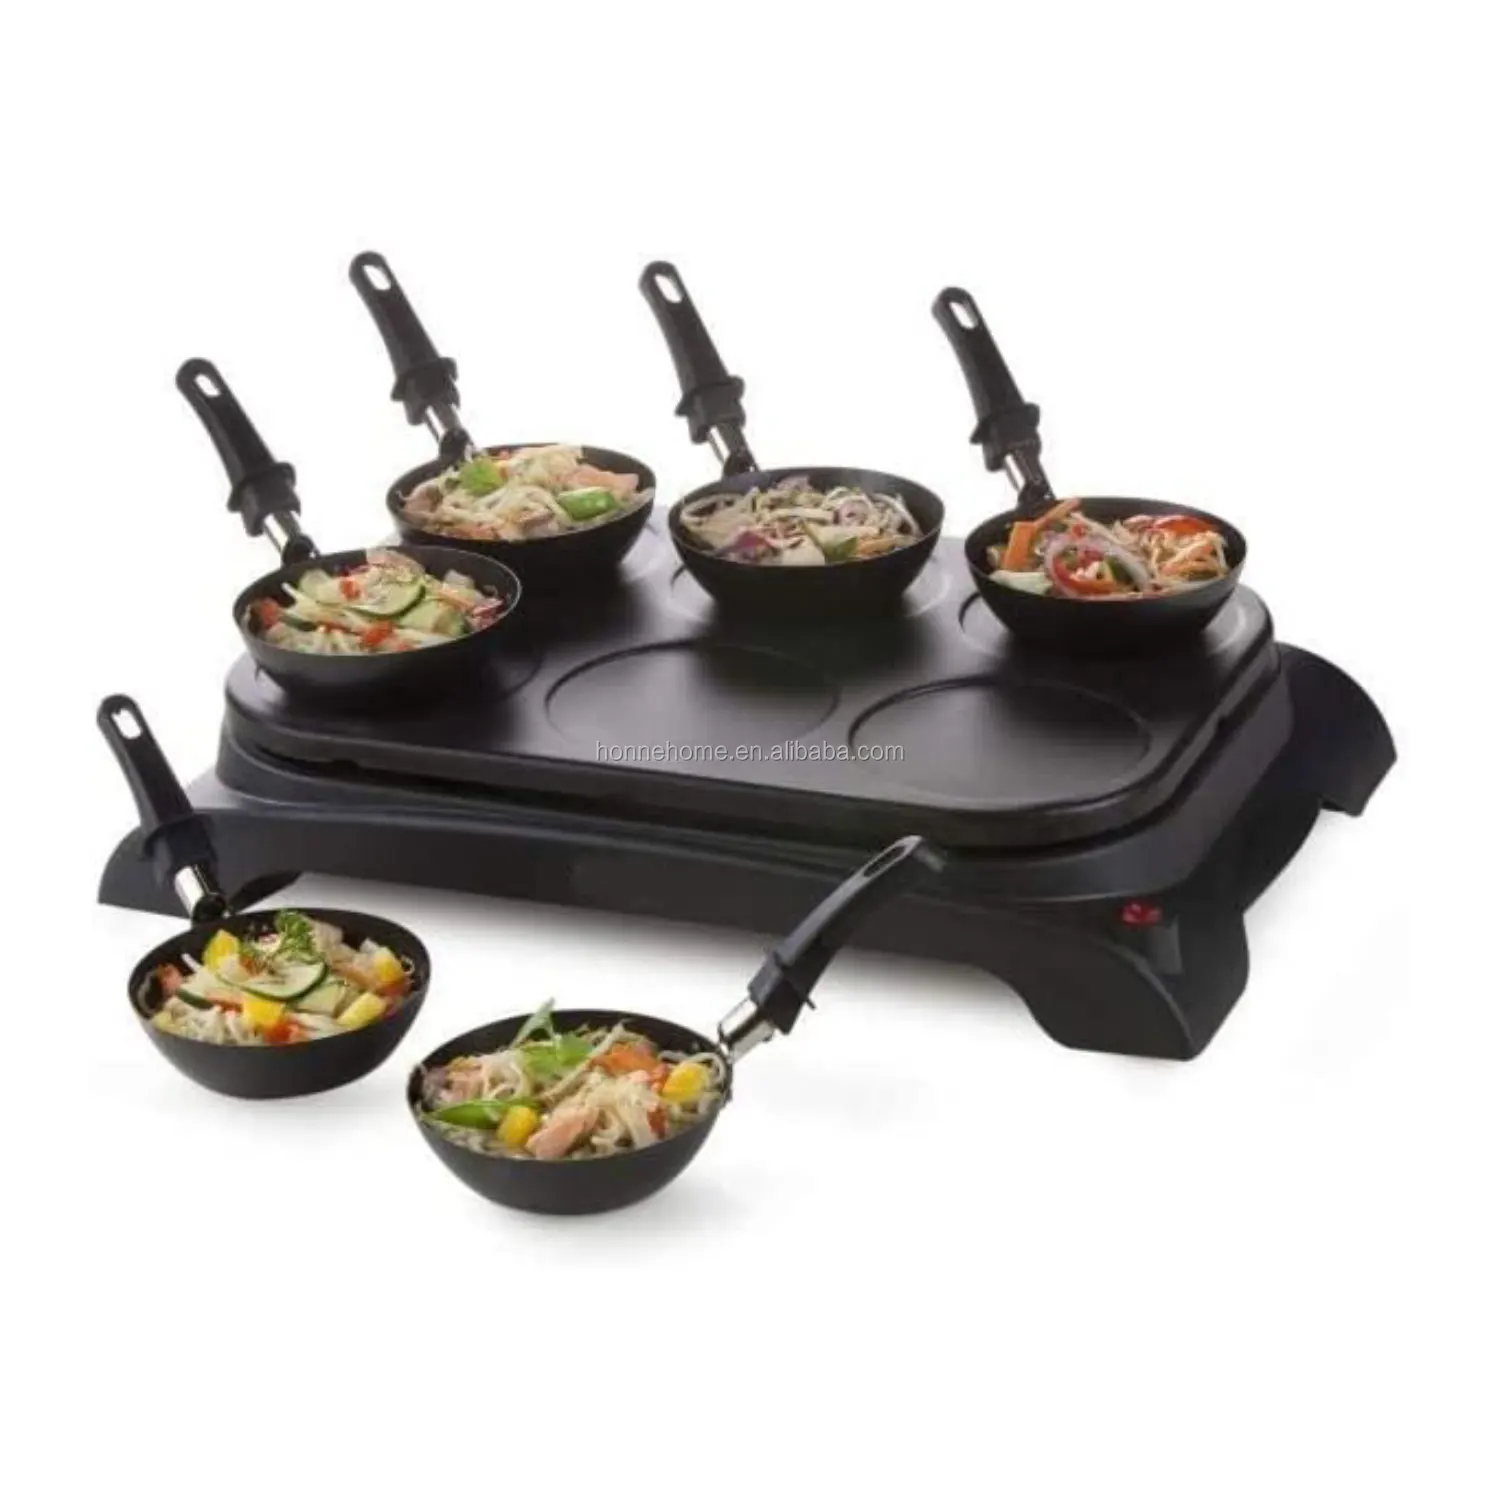 
Electric grill Party Wok Crepe Party Crepes and pancakes cooker Crepe Makers 